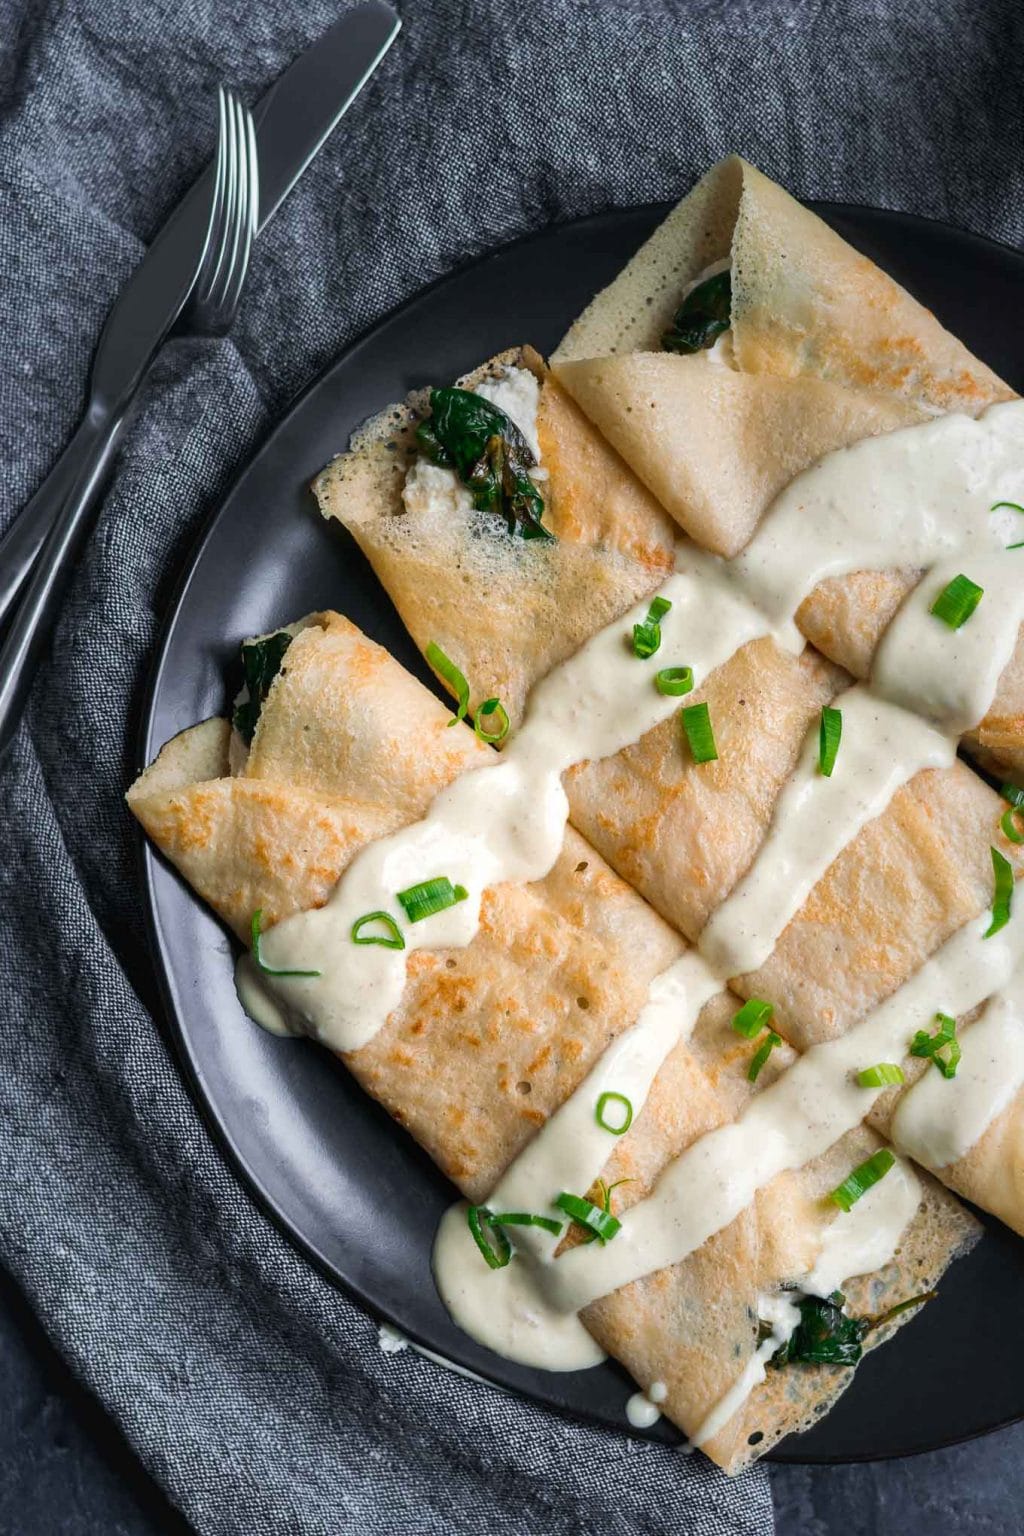 Savory crepes with almond cheese, sauteed spinach, and vegan hollandaise